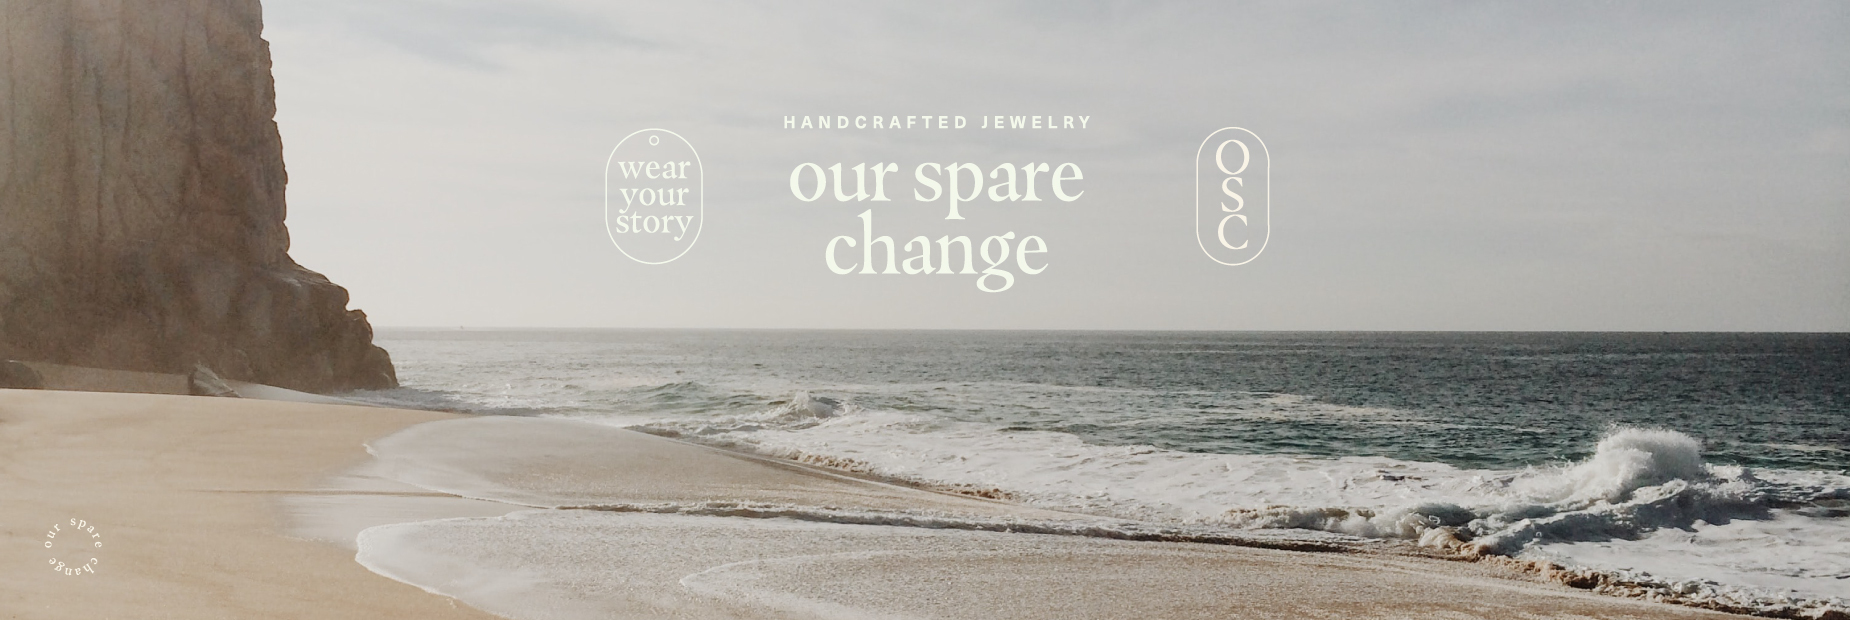 general public branding company our spare change jewelry